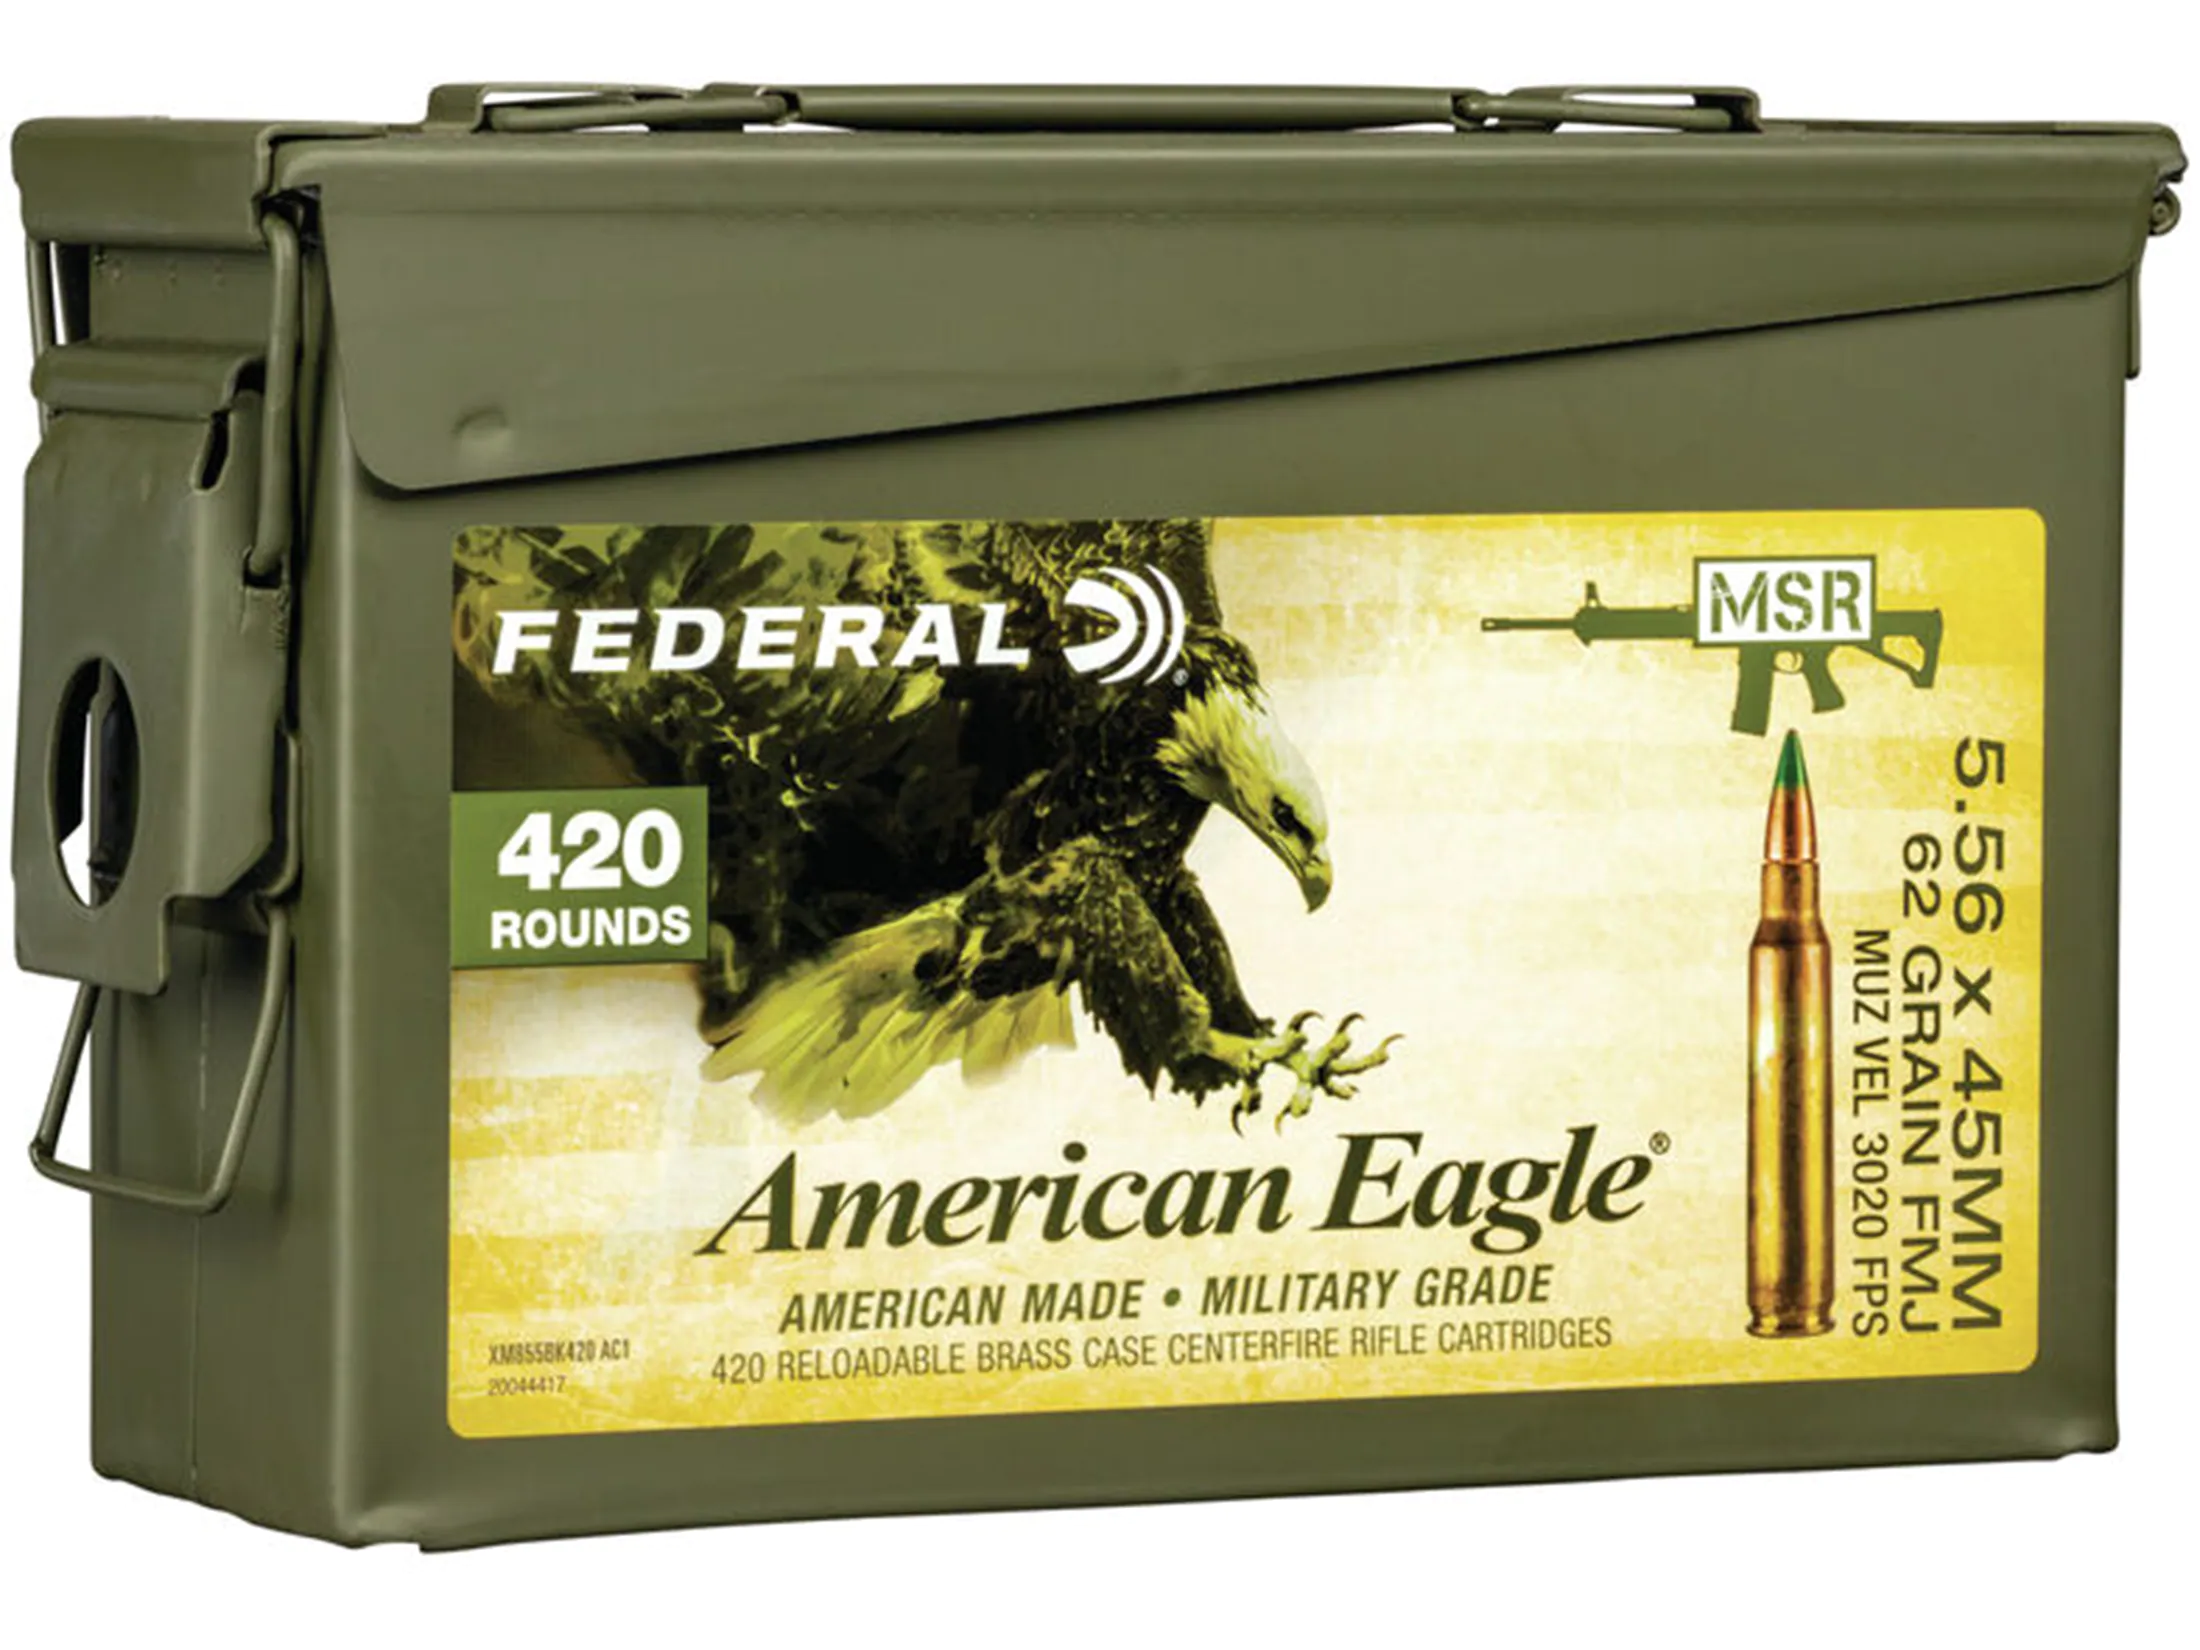 Image of Federal American Eagle Ammunition 5.56x45mm NATO 62 Grain XM855 SS109 Penetrator Full Metal Jacket Boat Tail Ammo Can of 420 (Bulk)